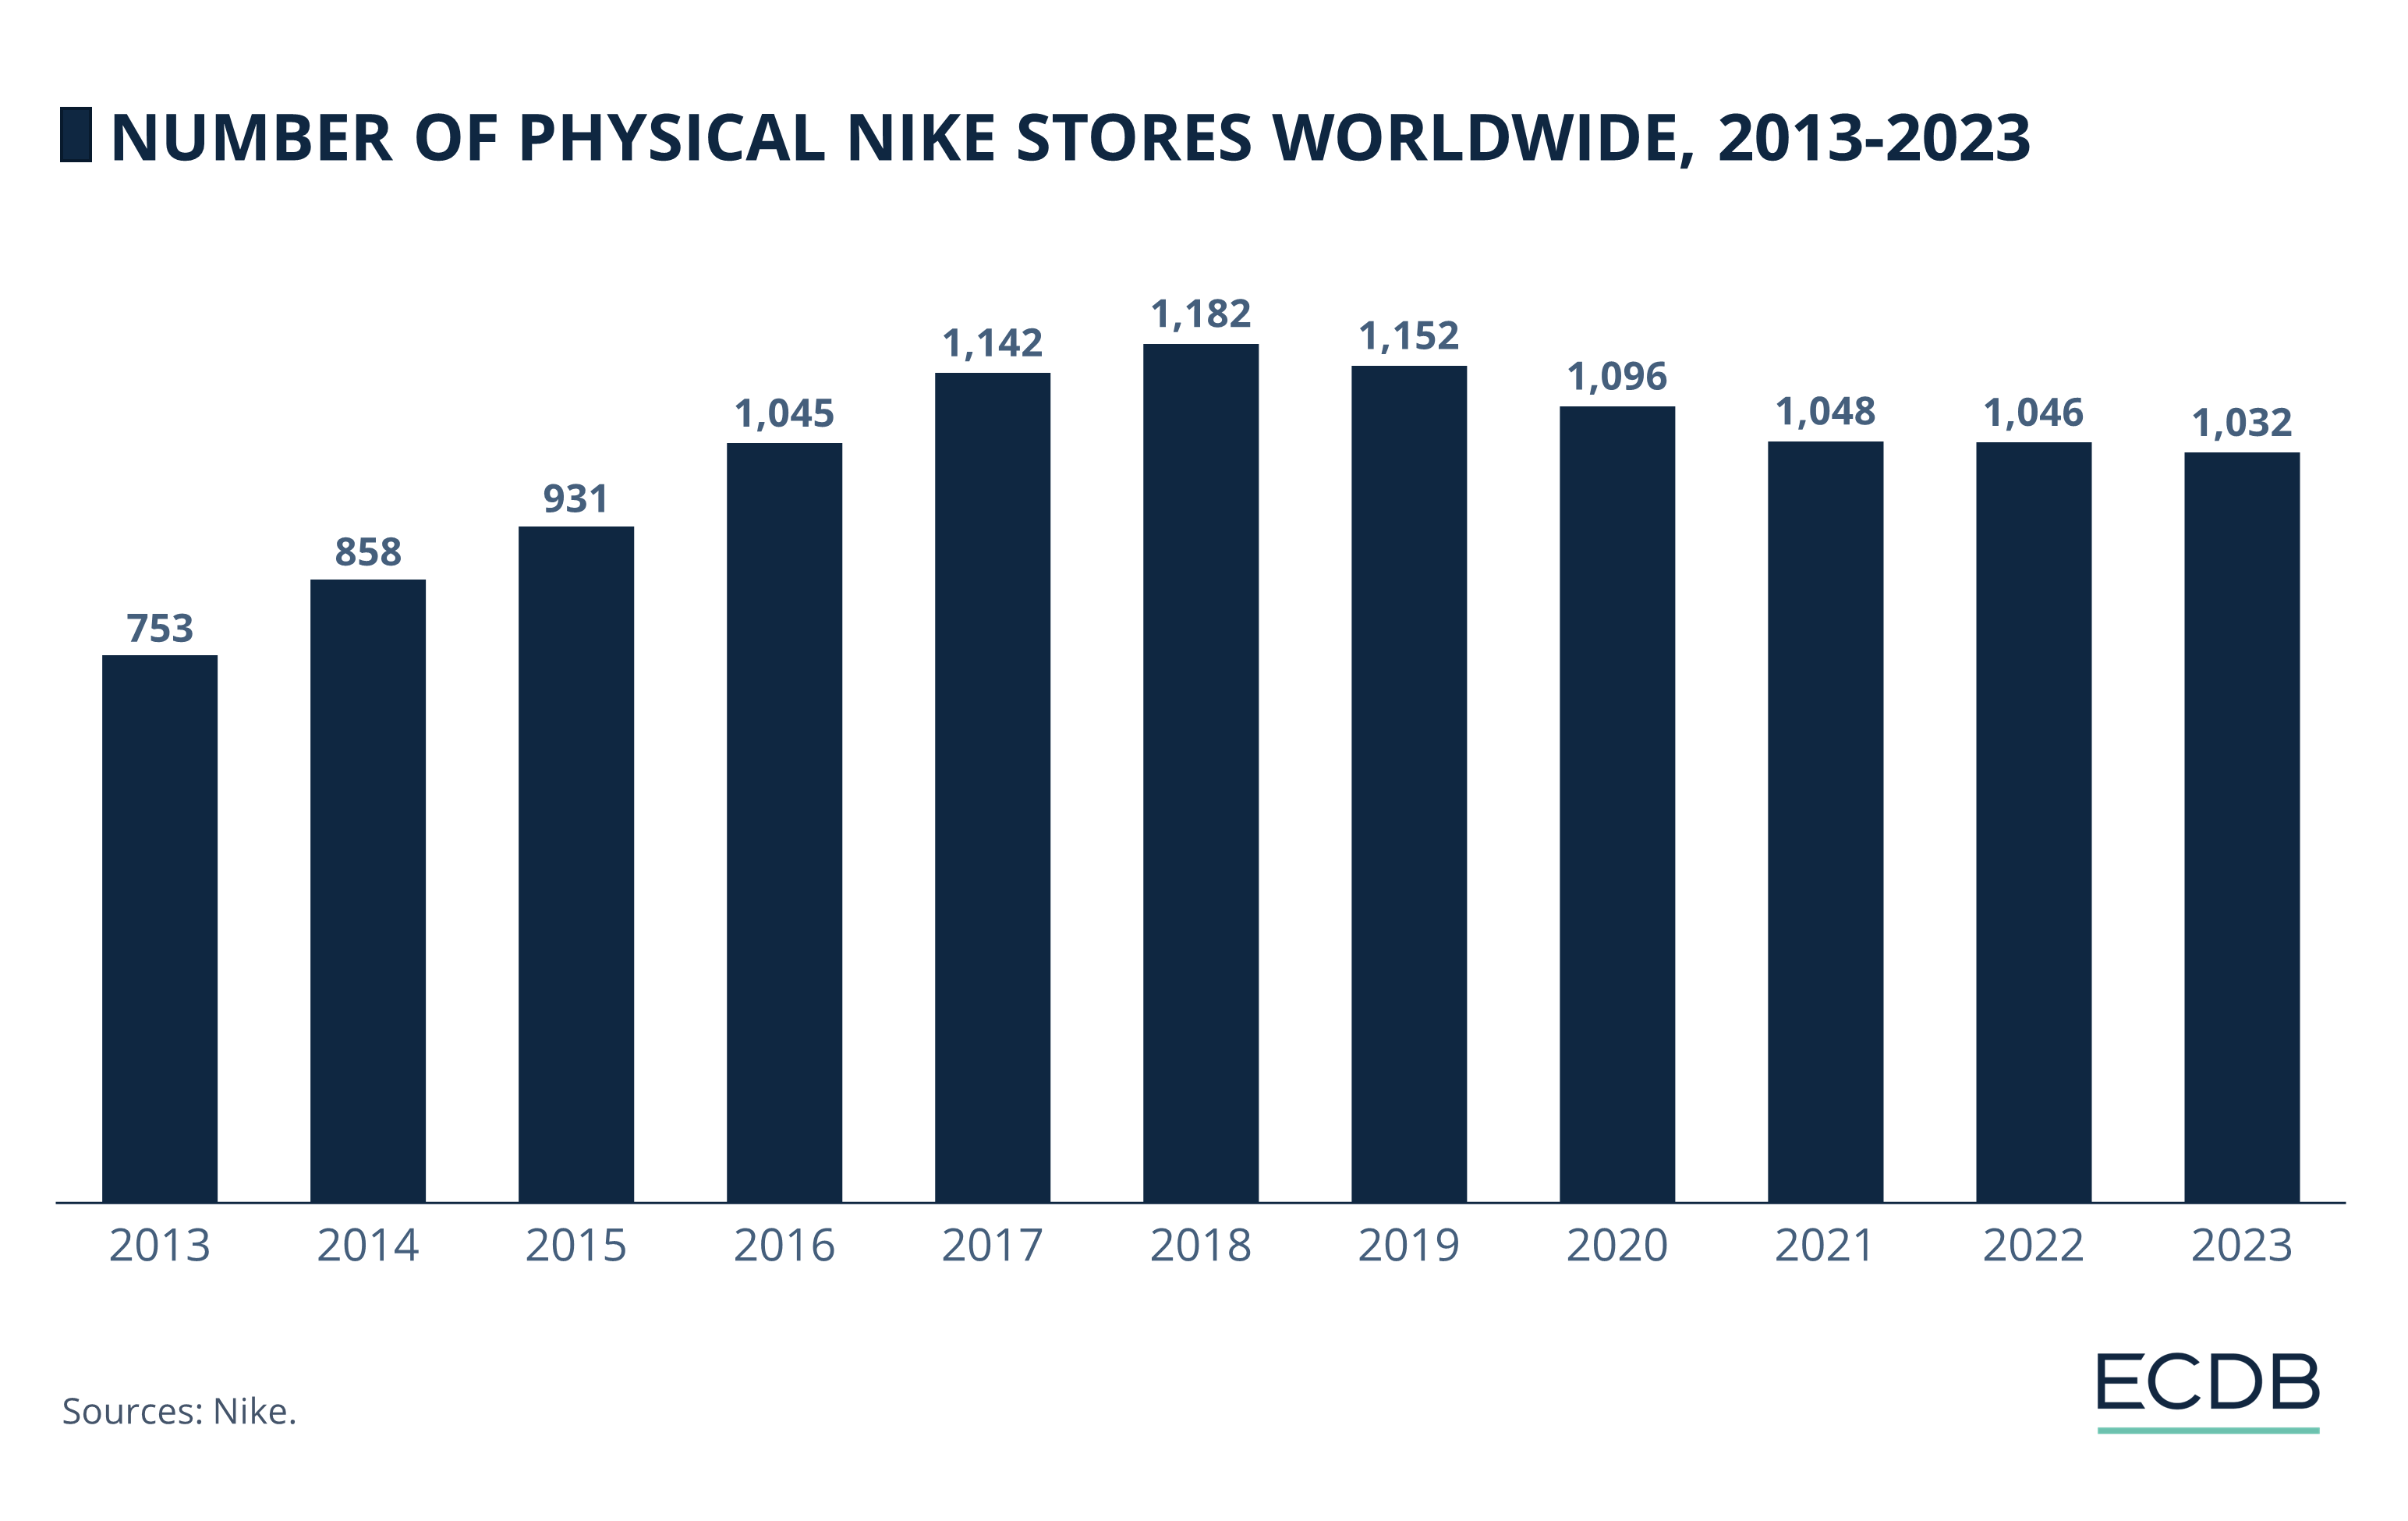 Number of Physical Nike Stores Worldwide, 2013-2023